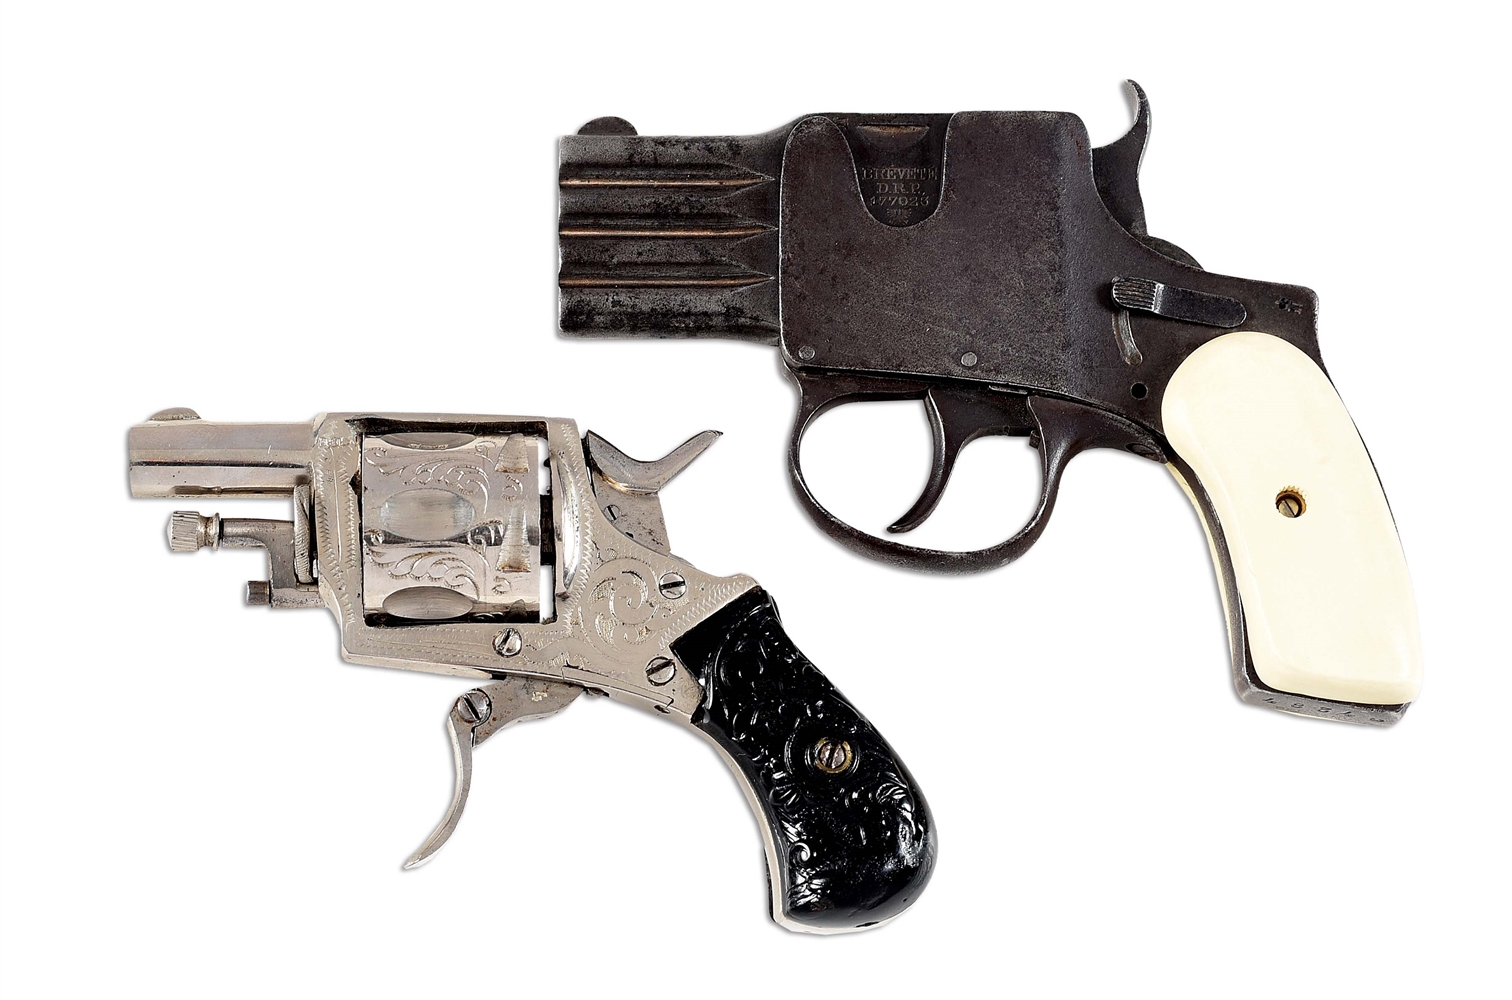 (C) LOT OF 2: GERAMN SCHULER REFORM PISTOL AND UNKNOWN ENGRAVED GERMAN PROOFED VELO-DOG STYLE REVOLVER.